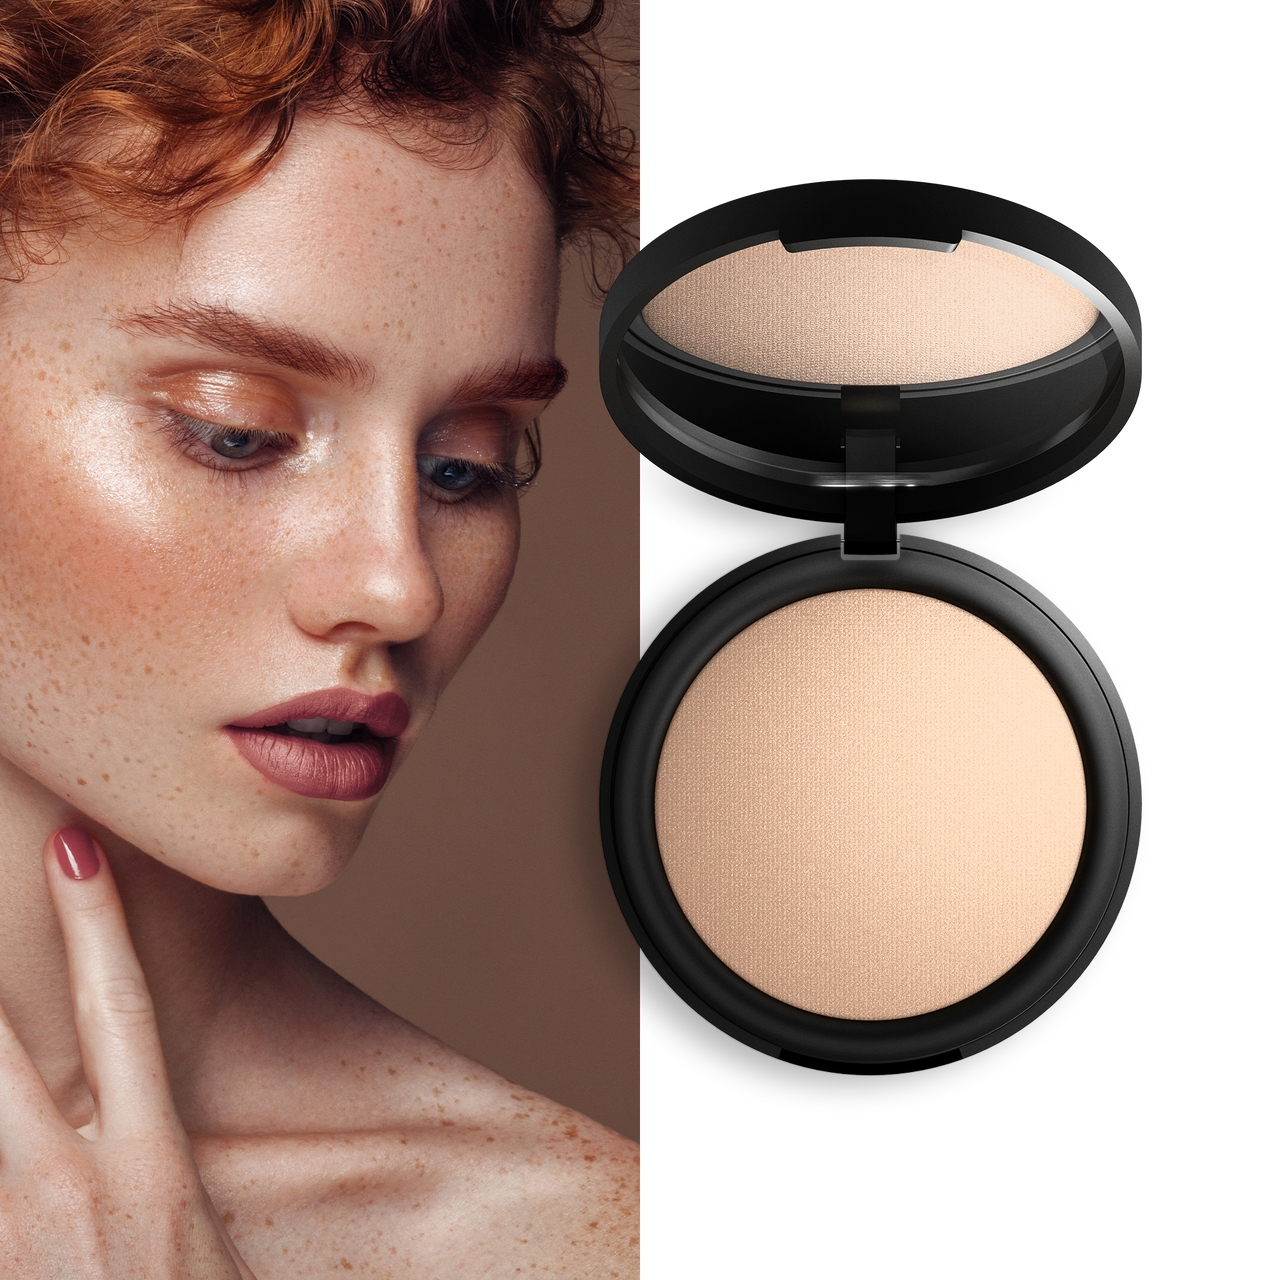 Inika Baked Mineral Foundation - Strength [8g]